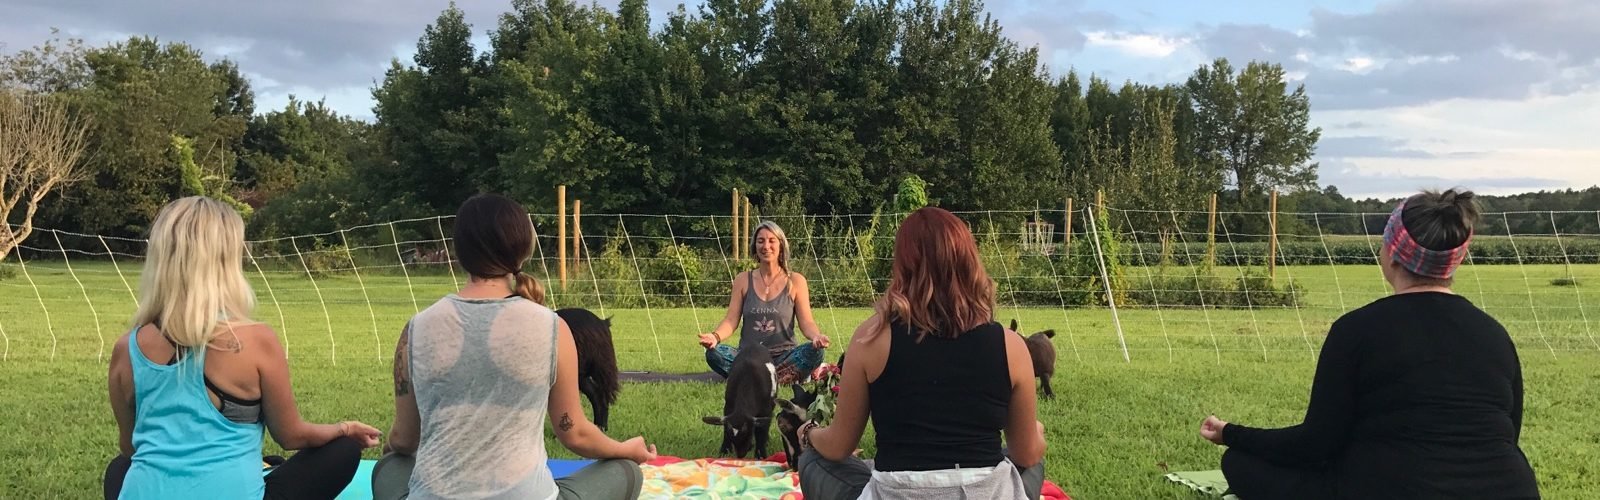 sunset goat yoga with goats playing in field as people meditate